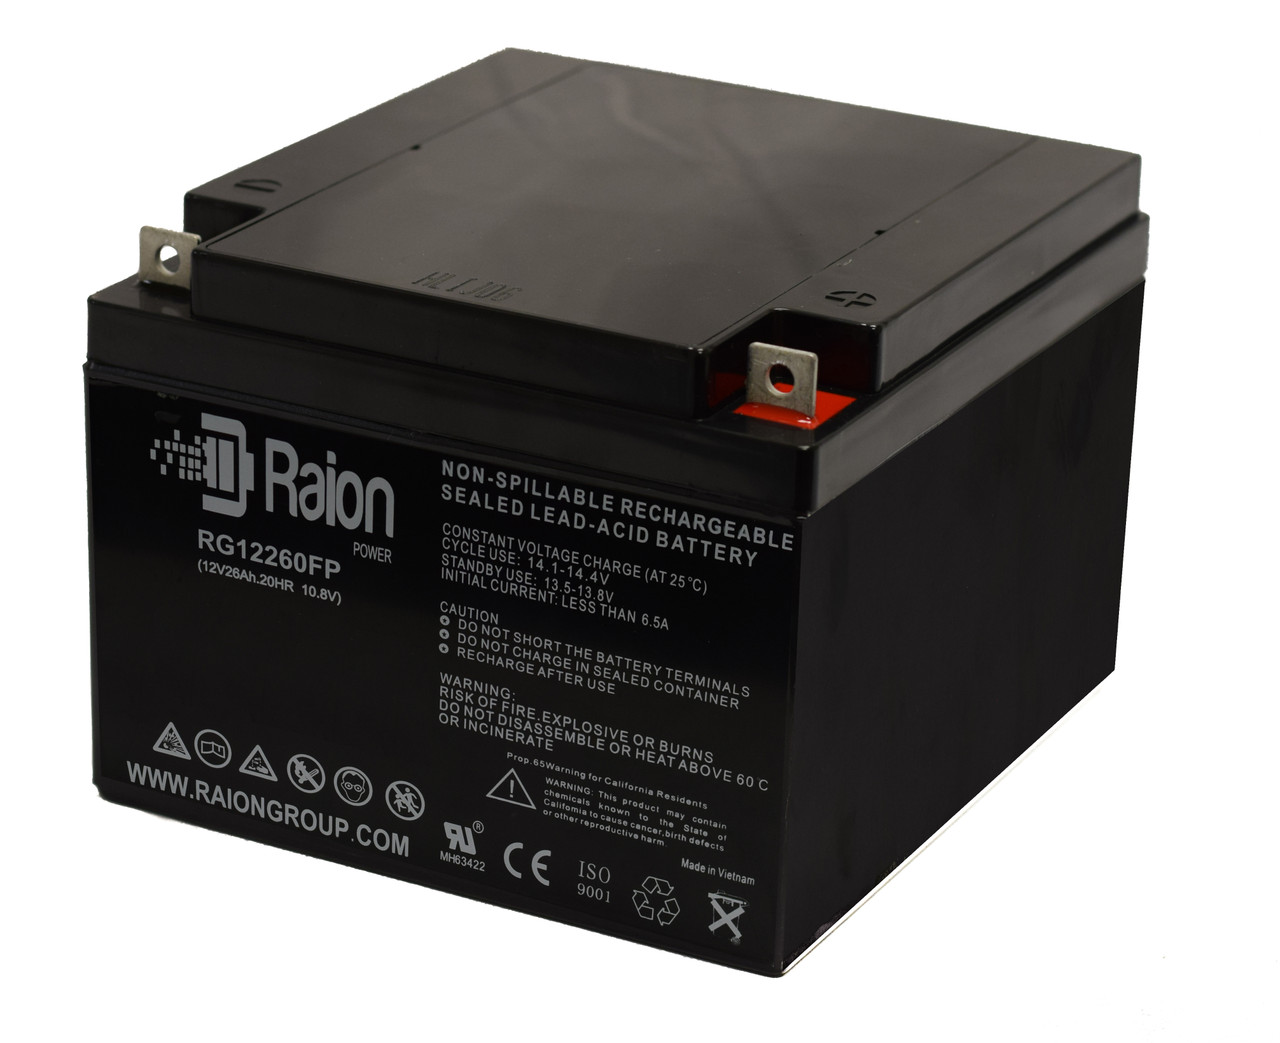 Raion Power Replacement 12V 26Ah Battery for Telong TL12280A - 1 Pack